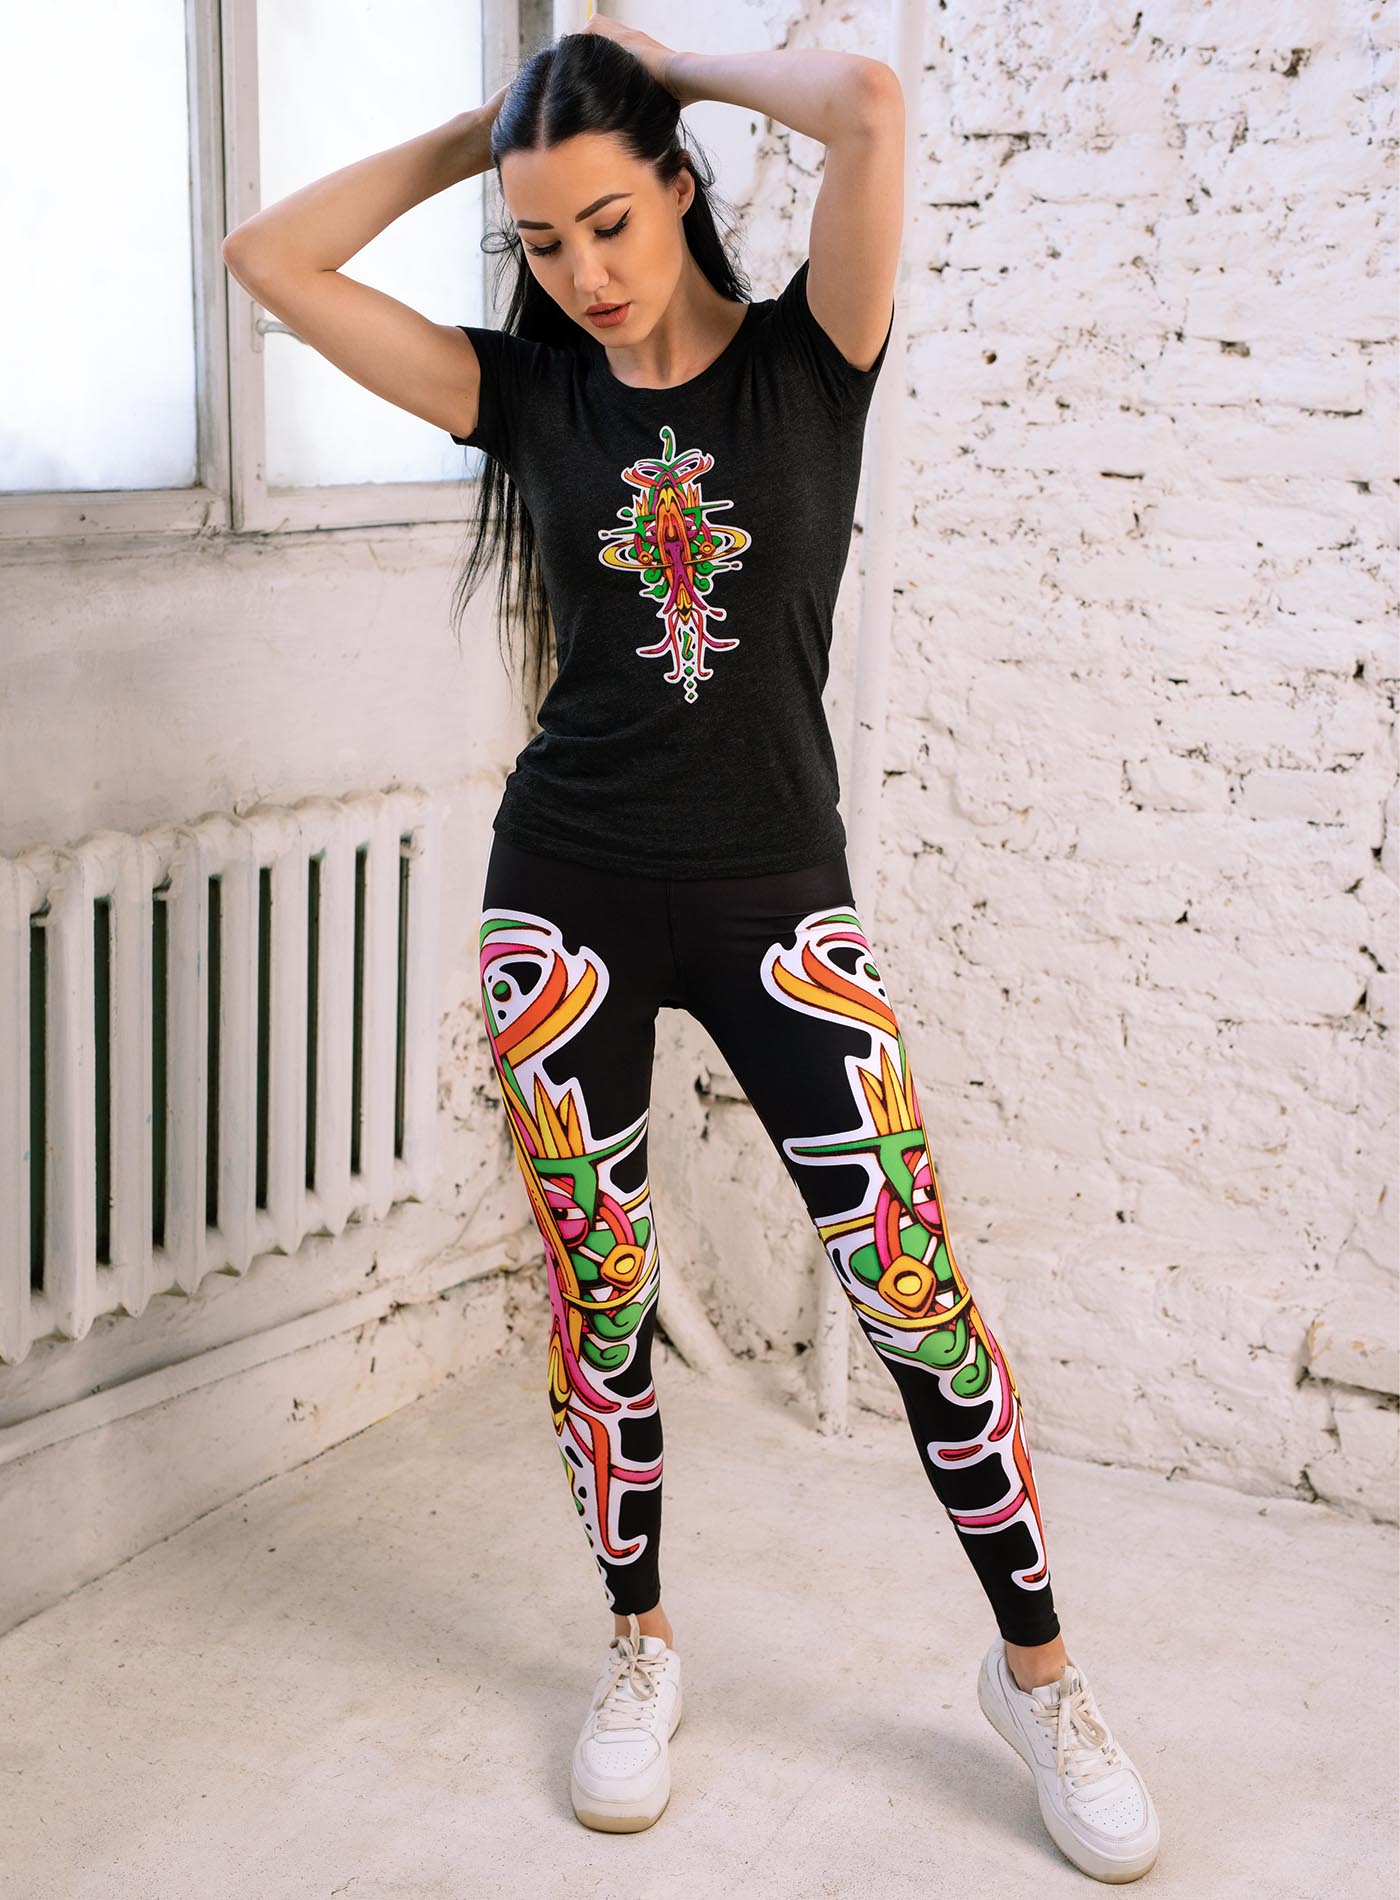 Woman modeling a Black woman's t-shirt and all over dye sublimation leggings featuring a front print of the Toltec-Aztec hummingbird deity illustrated by G.M. Meave.